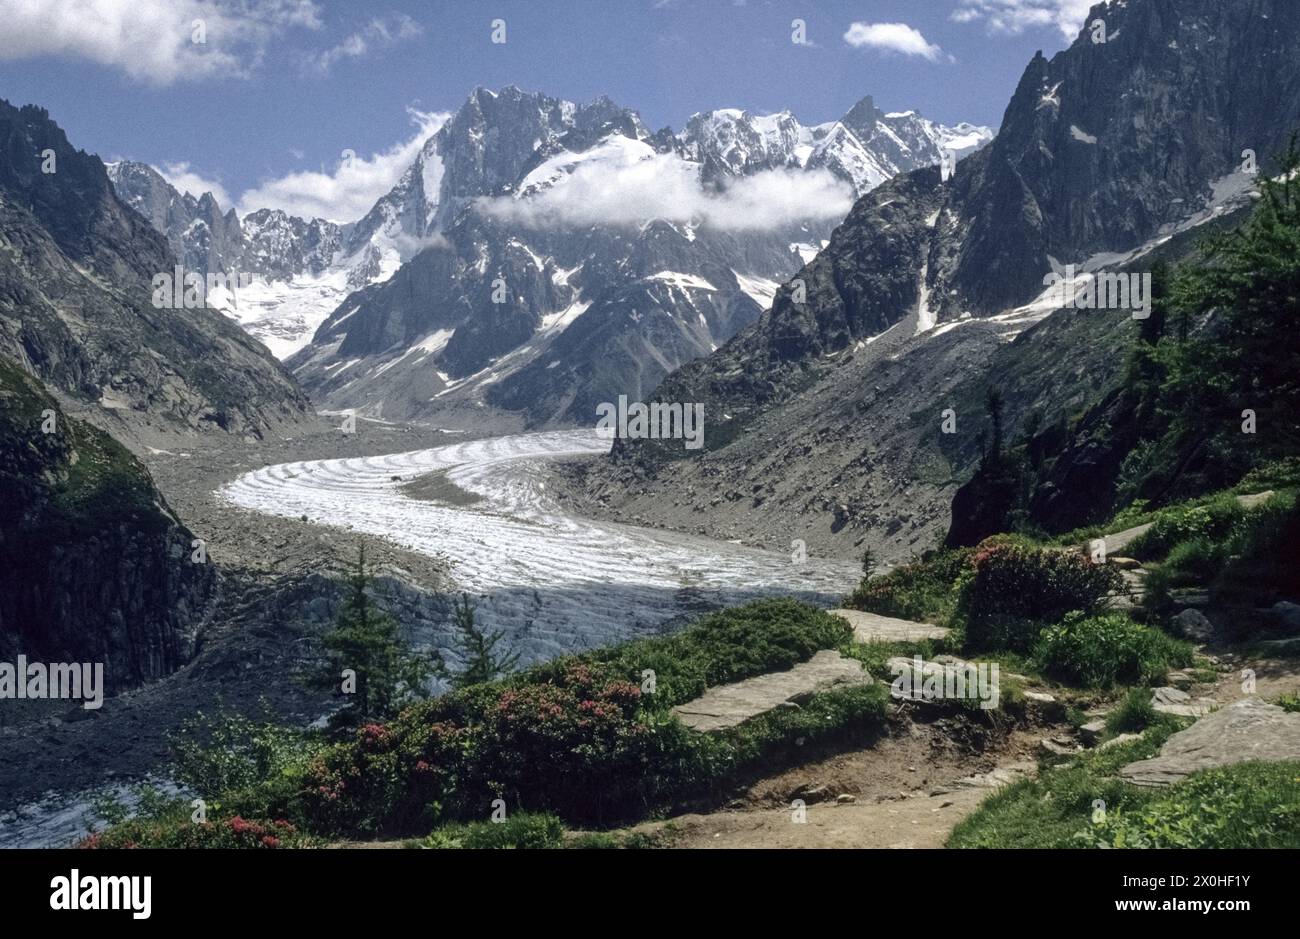 Alpine roses bloom along the path in front, the Mer de Glace glacier in the middle of the picture and the mountains of the Mont Blanc massif behind. [automated translation] Stock Photo